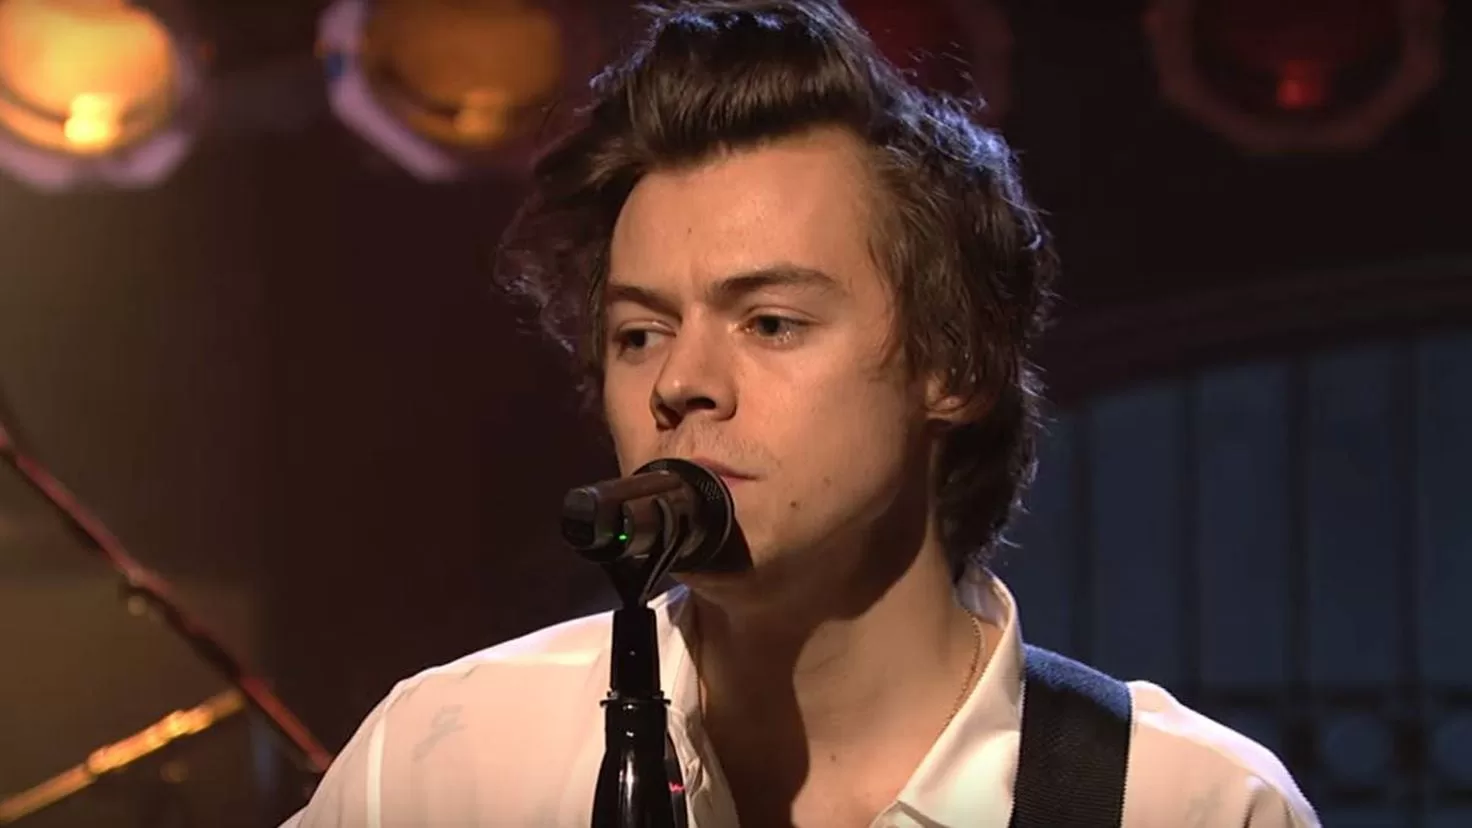 Harry Styles' new look: from his hair to a clean shave
